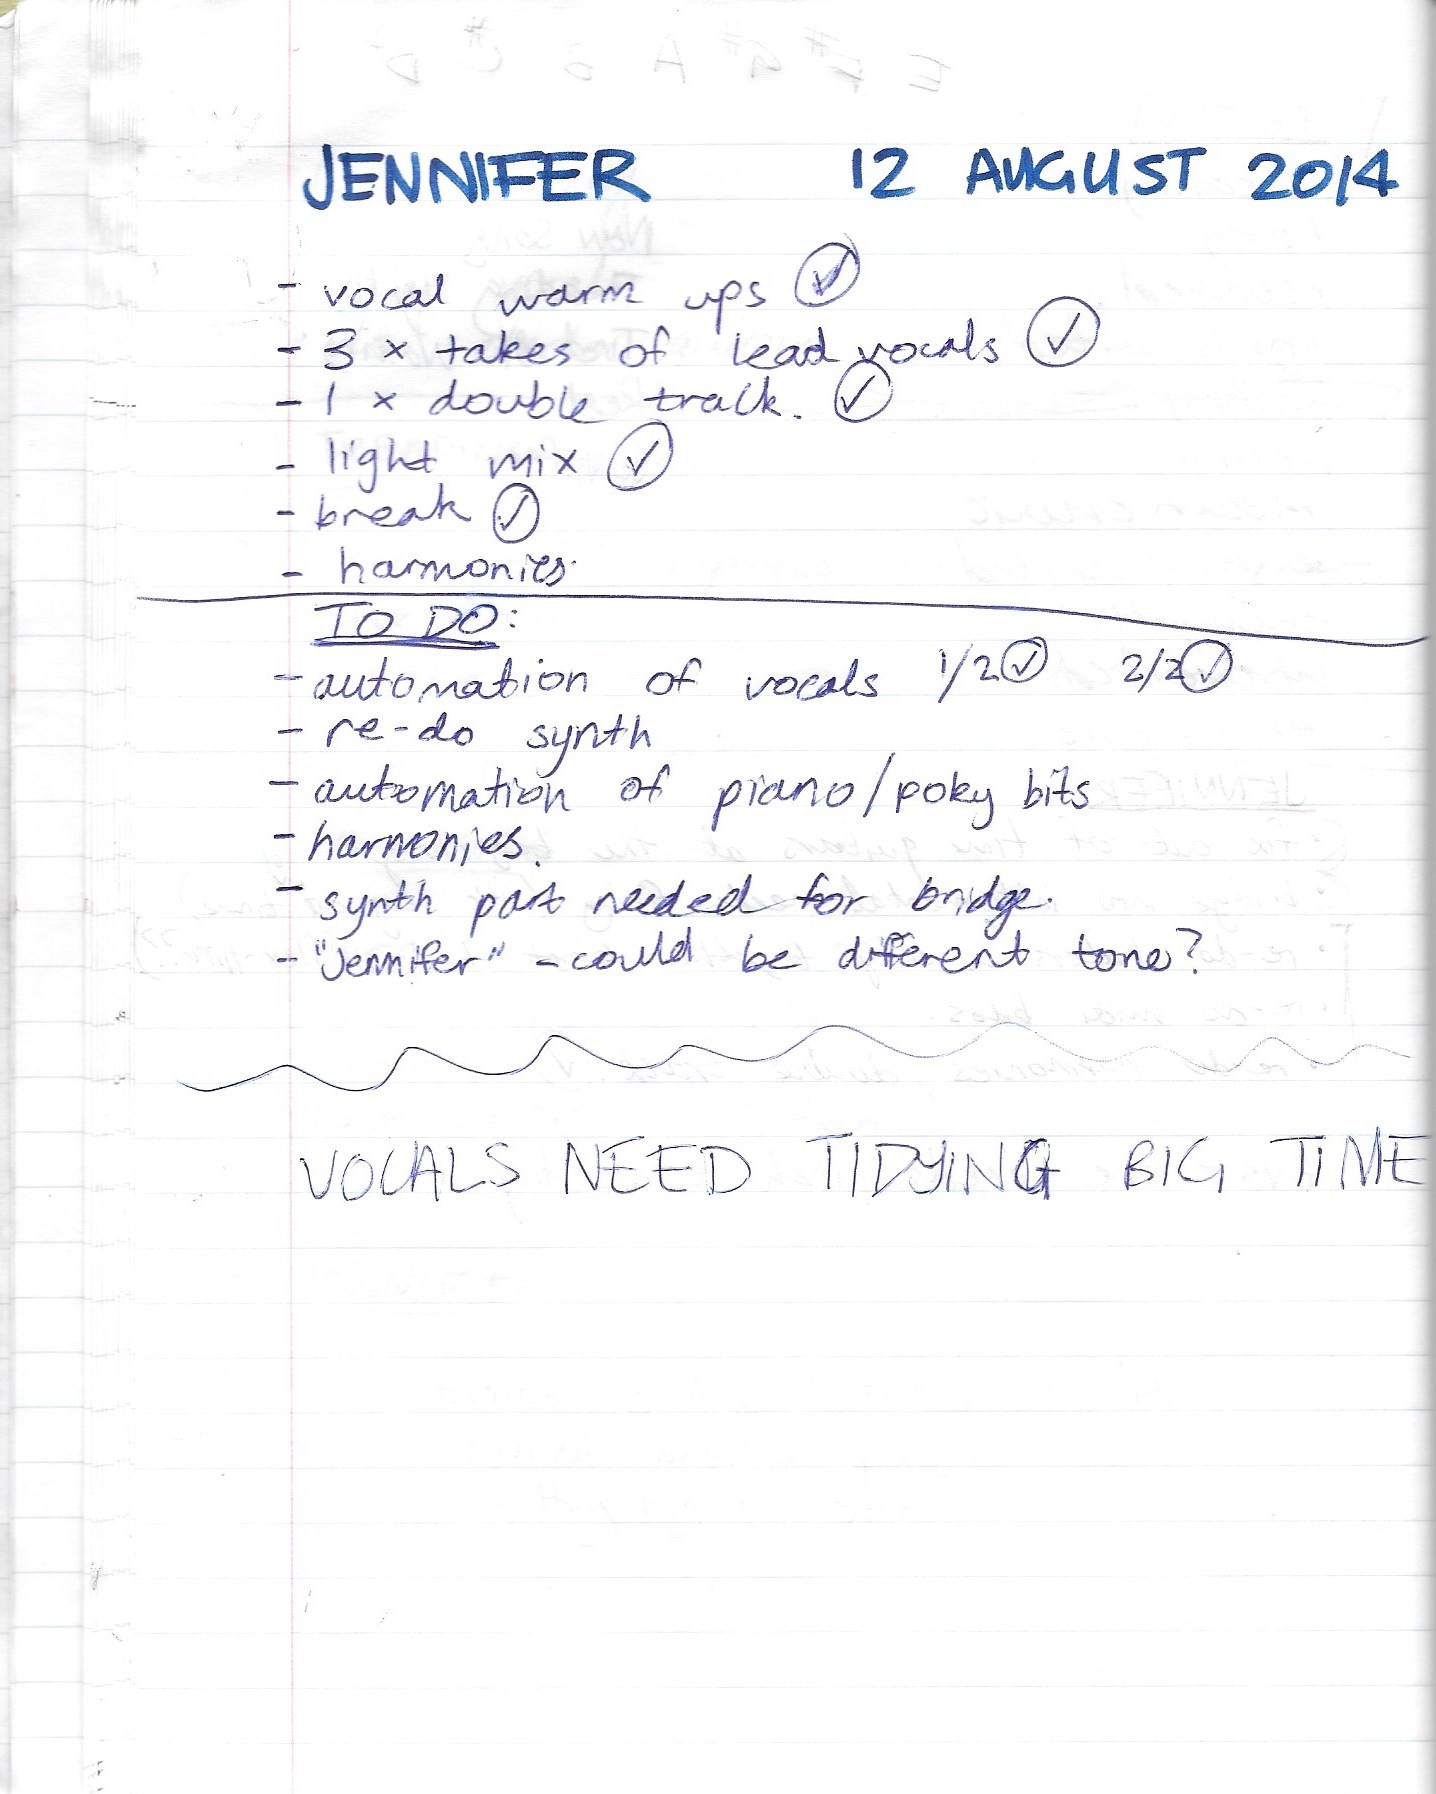 handwritten notes on how to improve song